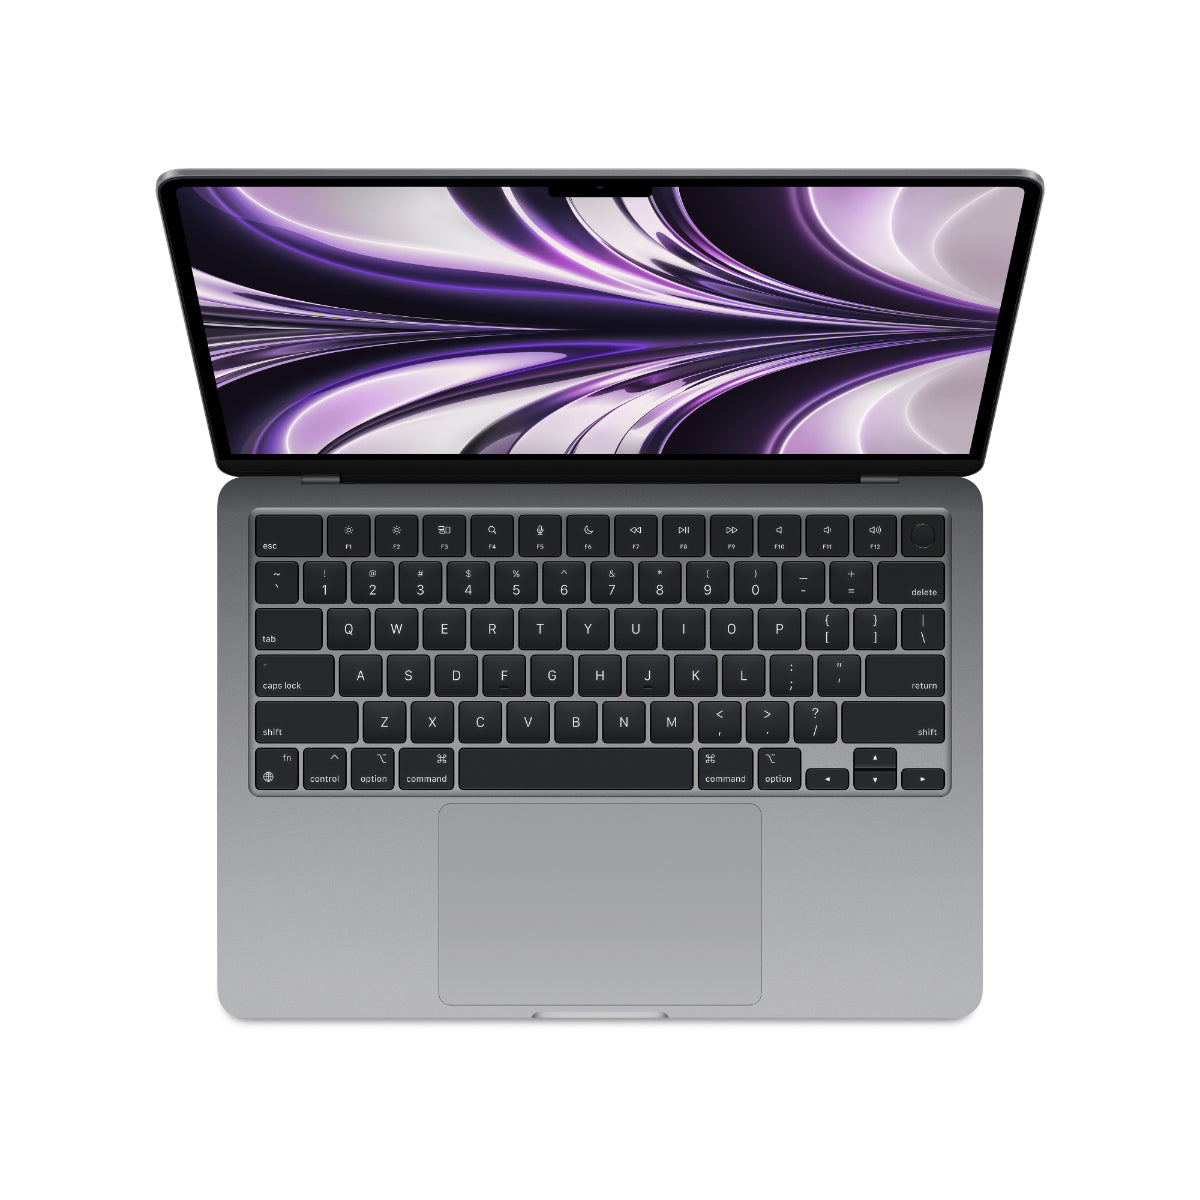 13-Inch MacBook Air: Apple M2 Chip with 8-Core CPU and 8-Core GPU, 256GB SSD - Space Grey